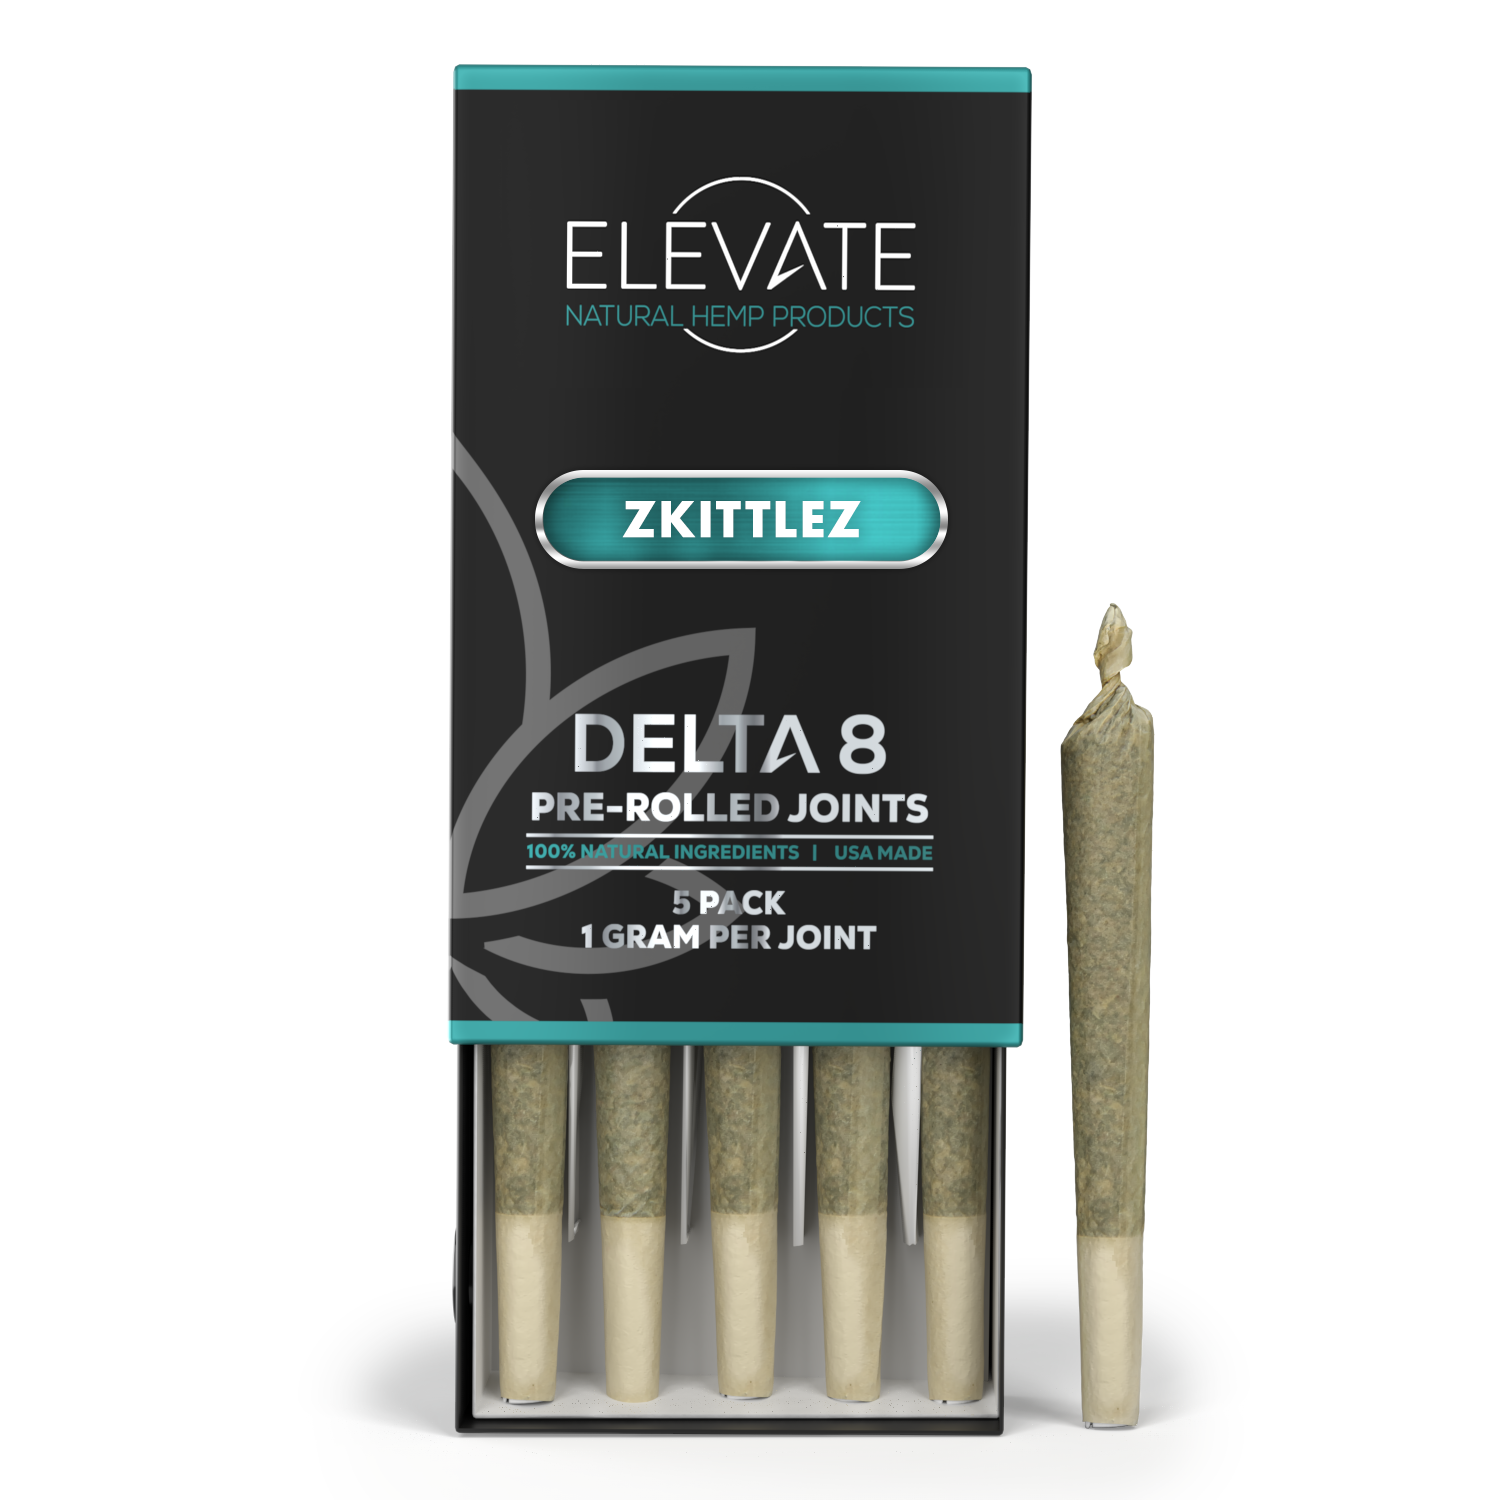 DELTA-8 PRE ROLLS By Elevateright -Exploring the Finest Delta-8 Pre-Rolls In-Depth Analysis and Review